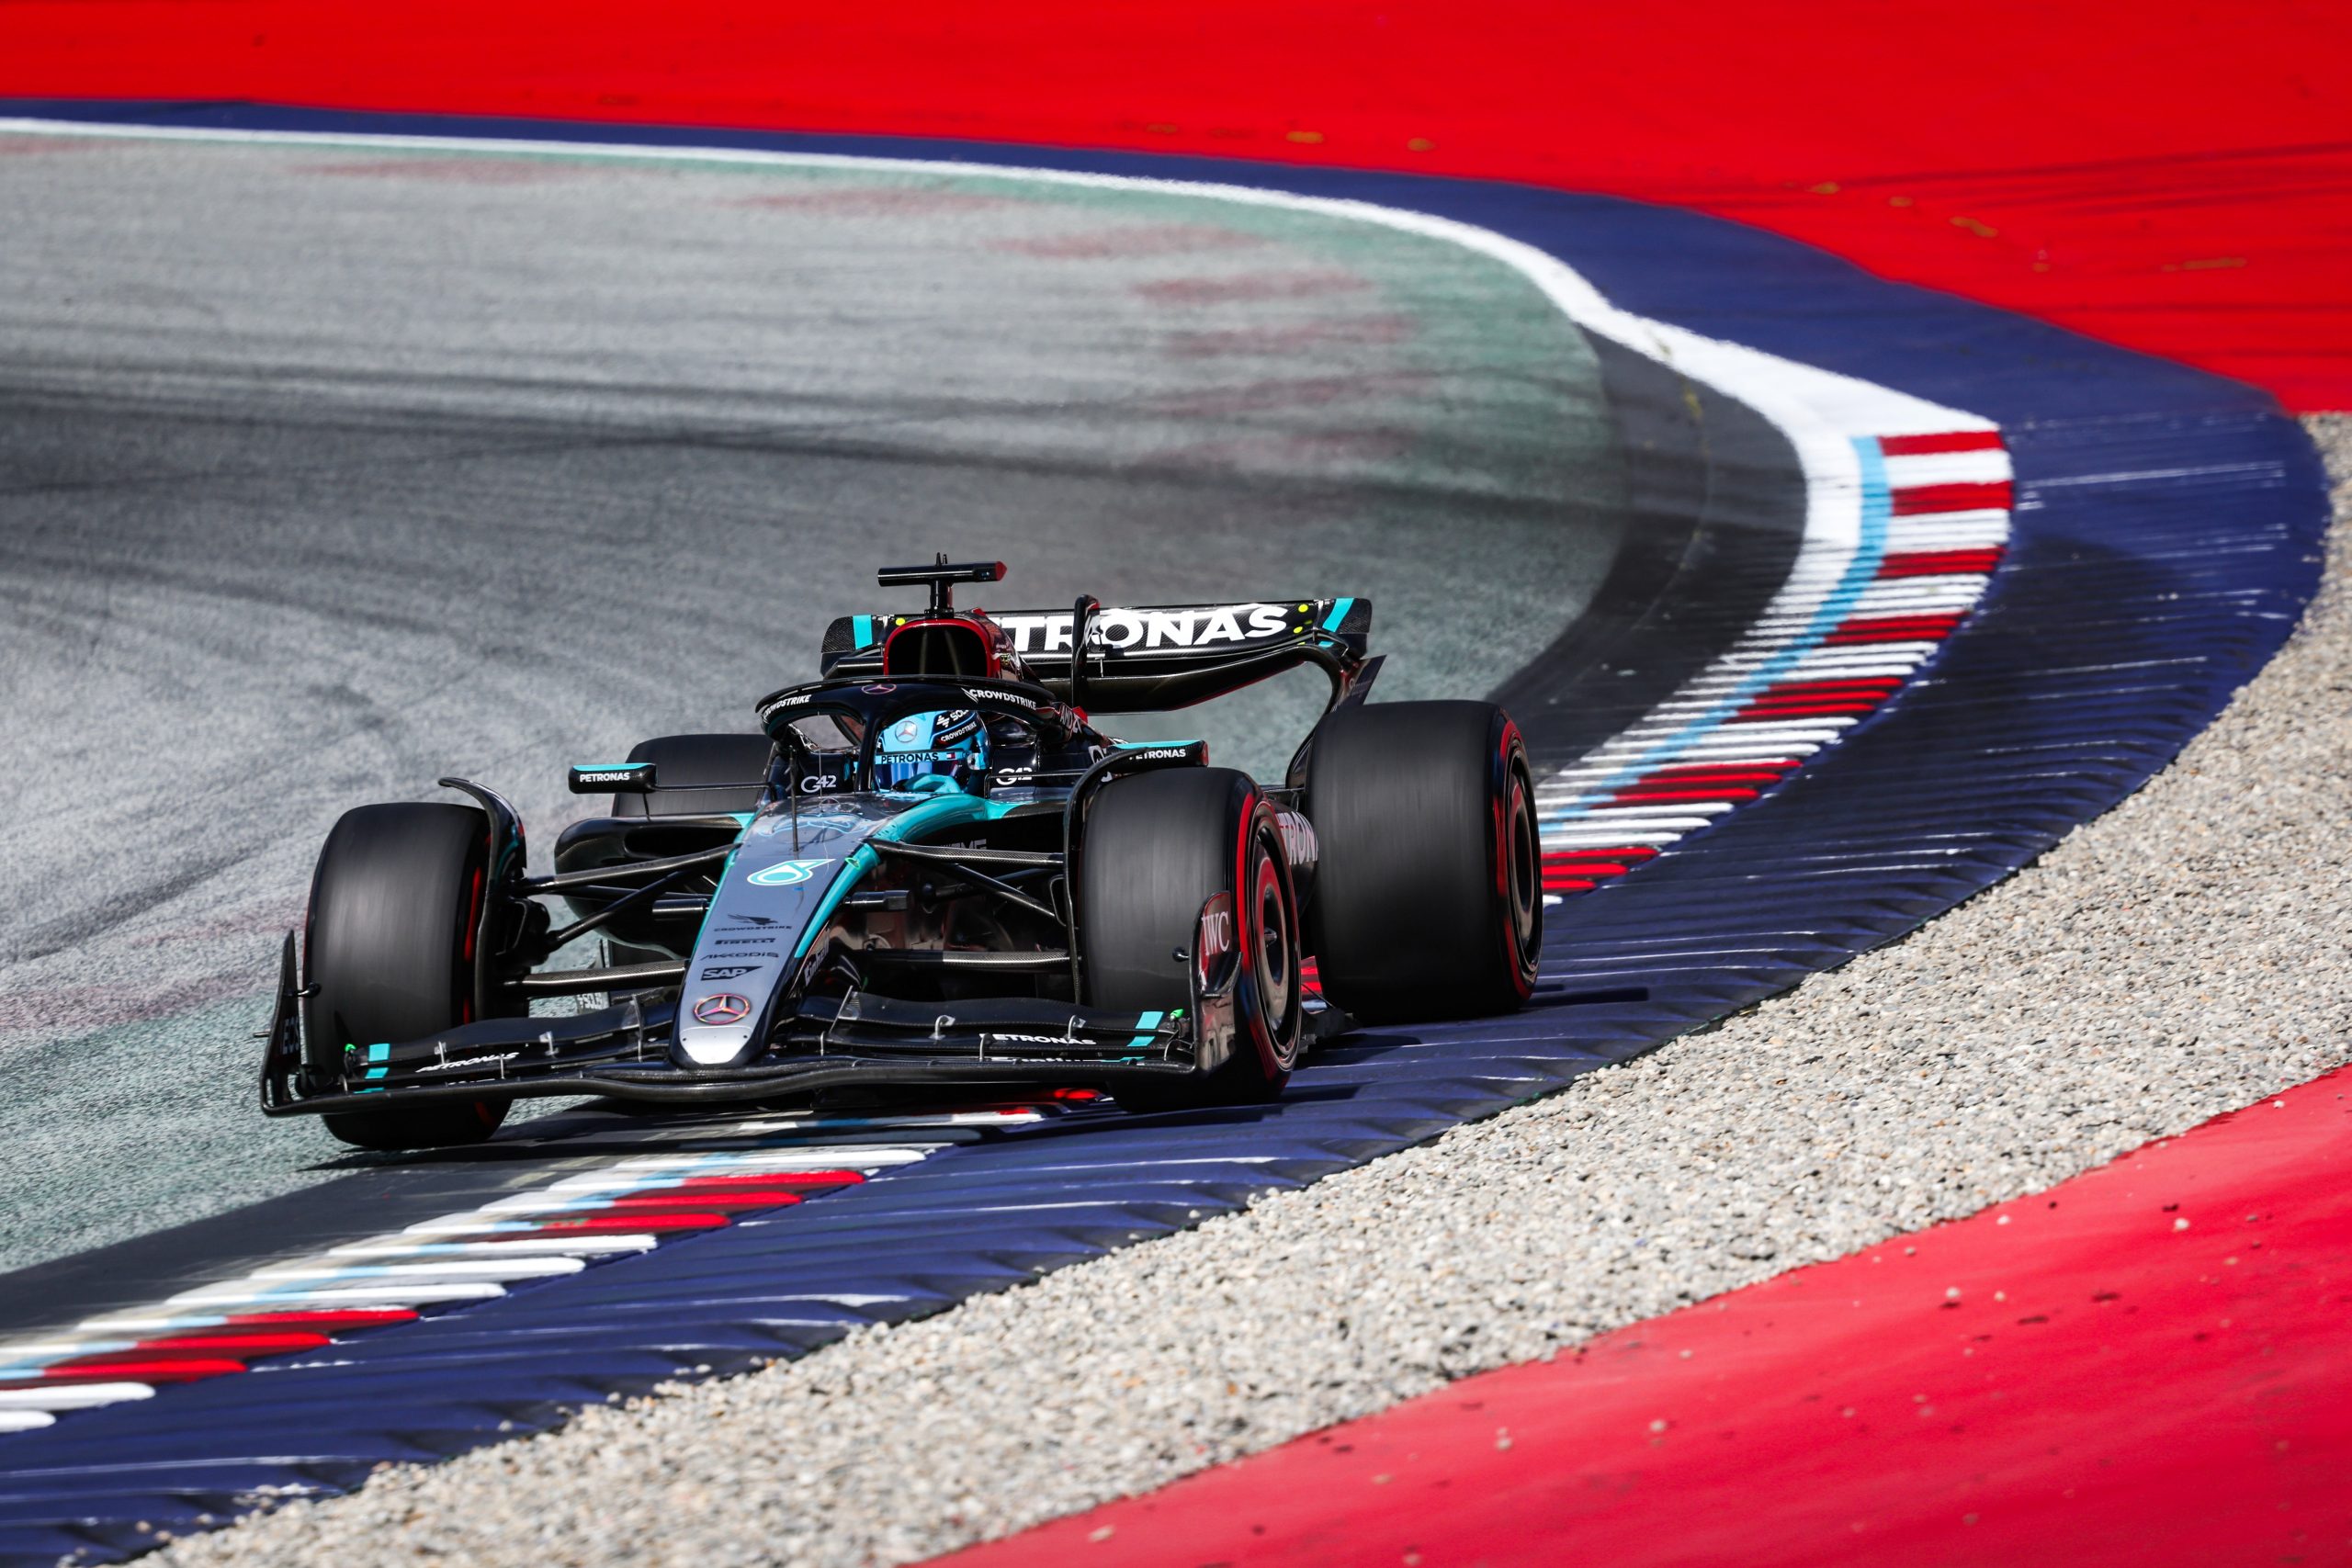 Formel 1 - Mercedes-AMG Petronas Motorsport, Großer Preis von Österreich 2024. George Russell Formula One - Mercedes-AMG Petronas Motorsport, Austrian GP 2024. George Russell George Russell (63) on track in his Mercedes AMG F1 W15 during the 2024 Austrian Grand Prix at the Red Bull Ring (Source: Mercedes AMG)